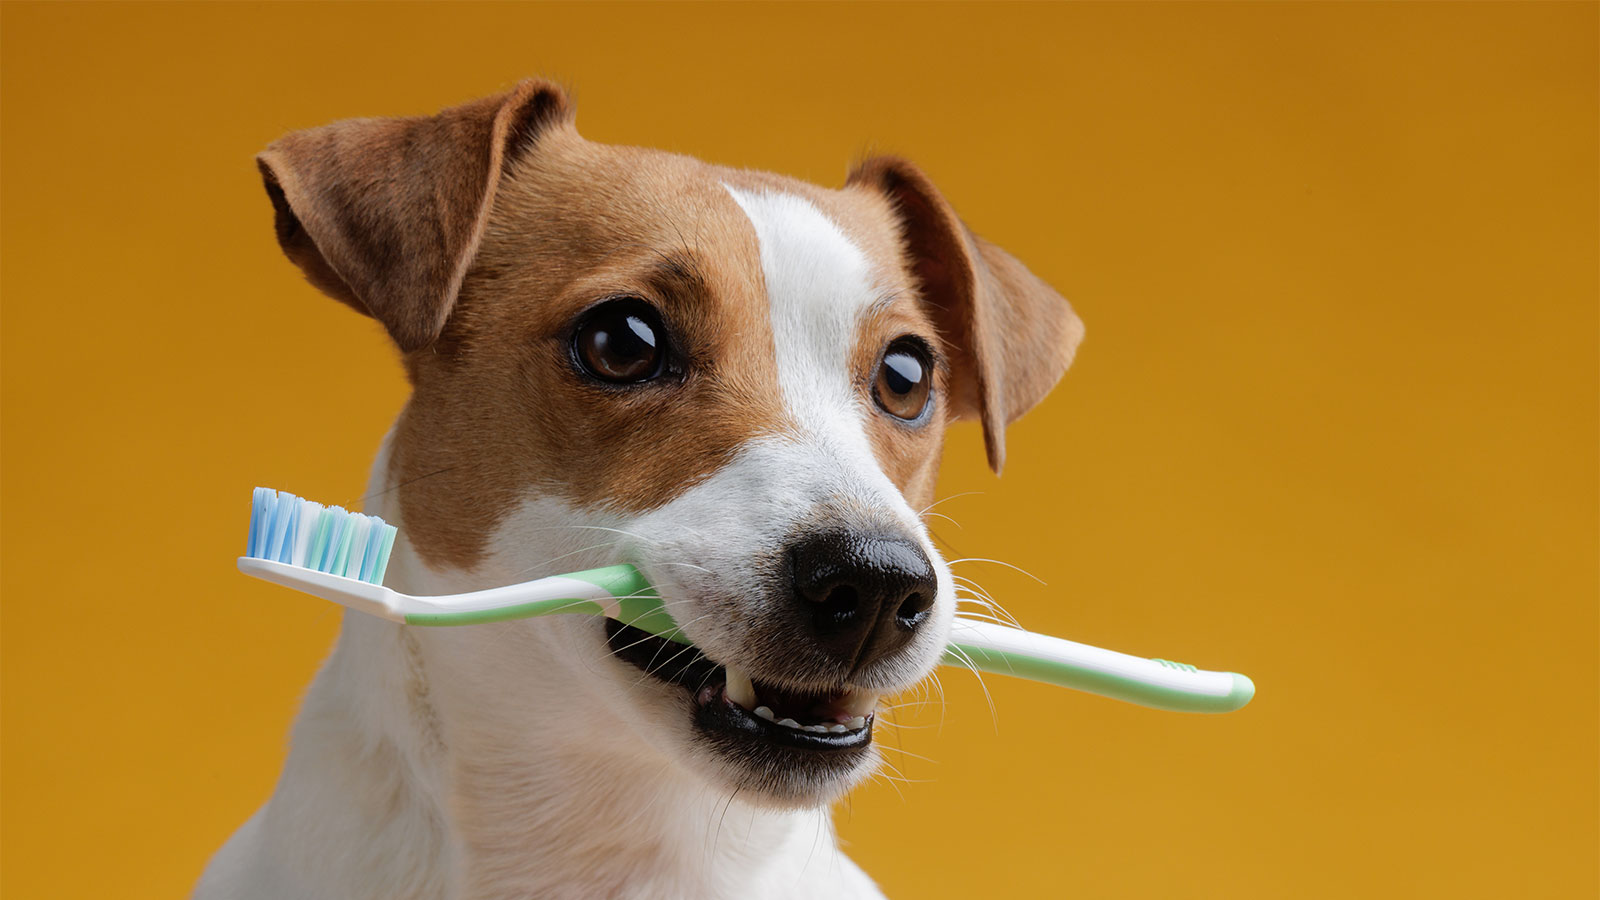 How to Look After Your Dog's Teeth?